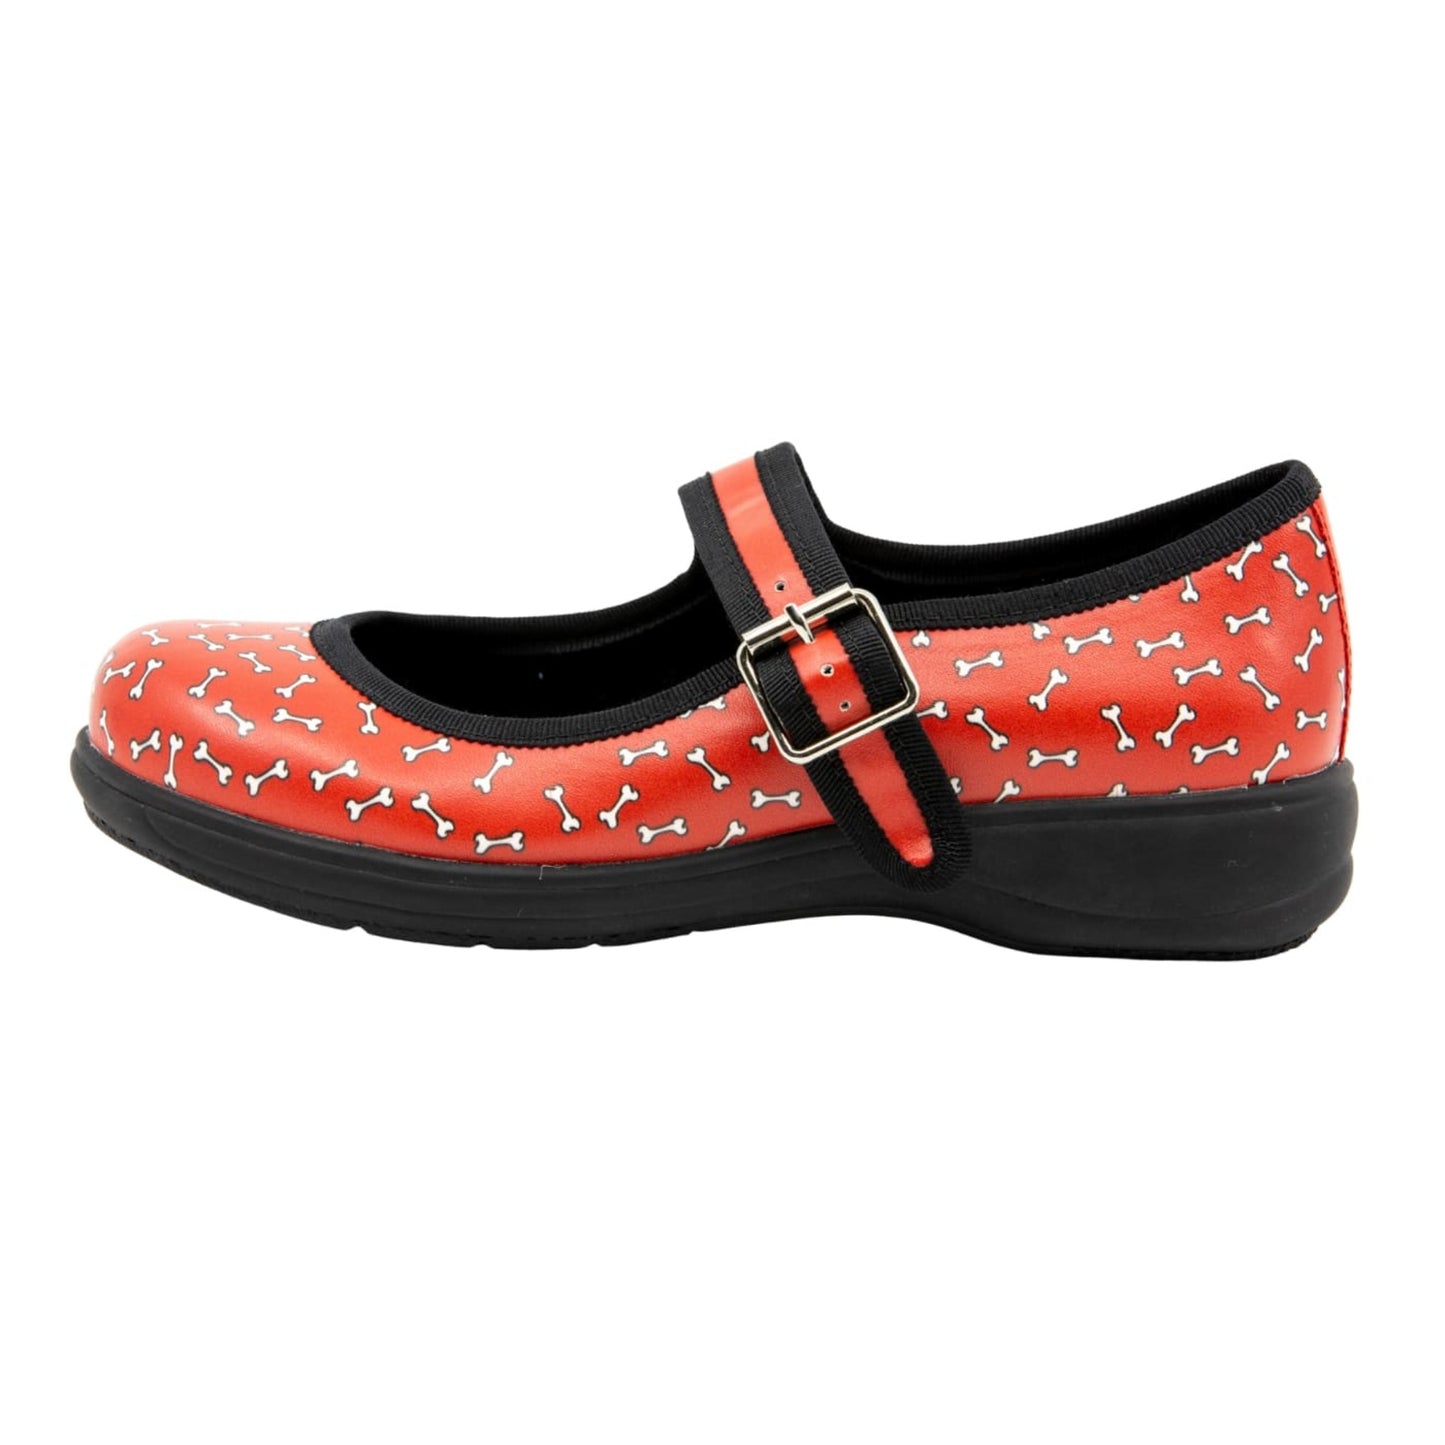 Puppy Love Mary Janes by RainbowsAndFairies.com.au (Dalmations - Dog Bones - Red & Black - Buckle Up Shoes - Mismatched Shoes - Fire Truck - Dogs) - SKU: FW_MARYJ_PUPPY_ORG - Pic-03